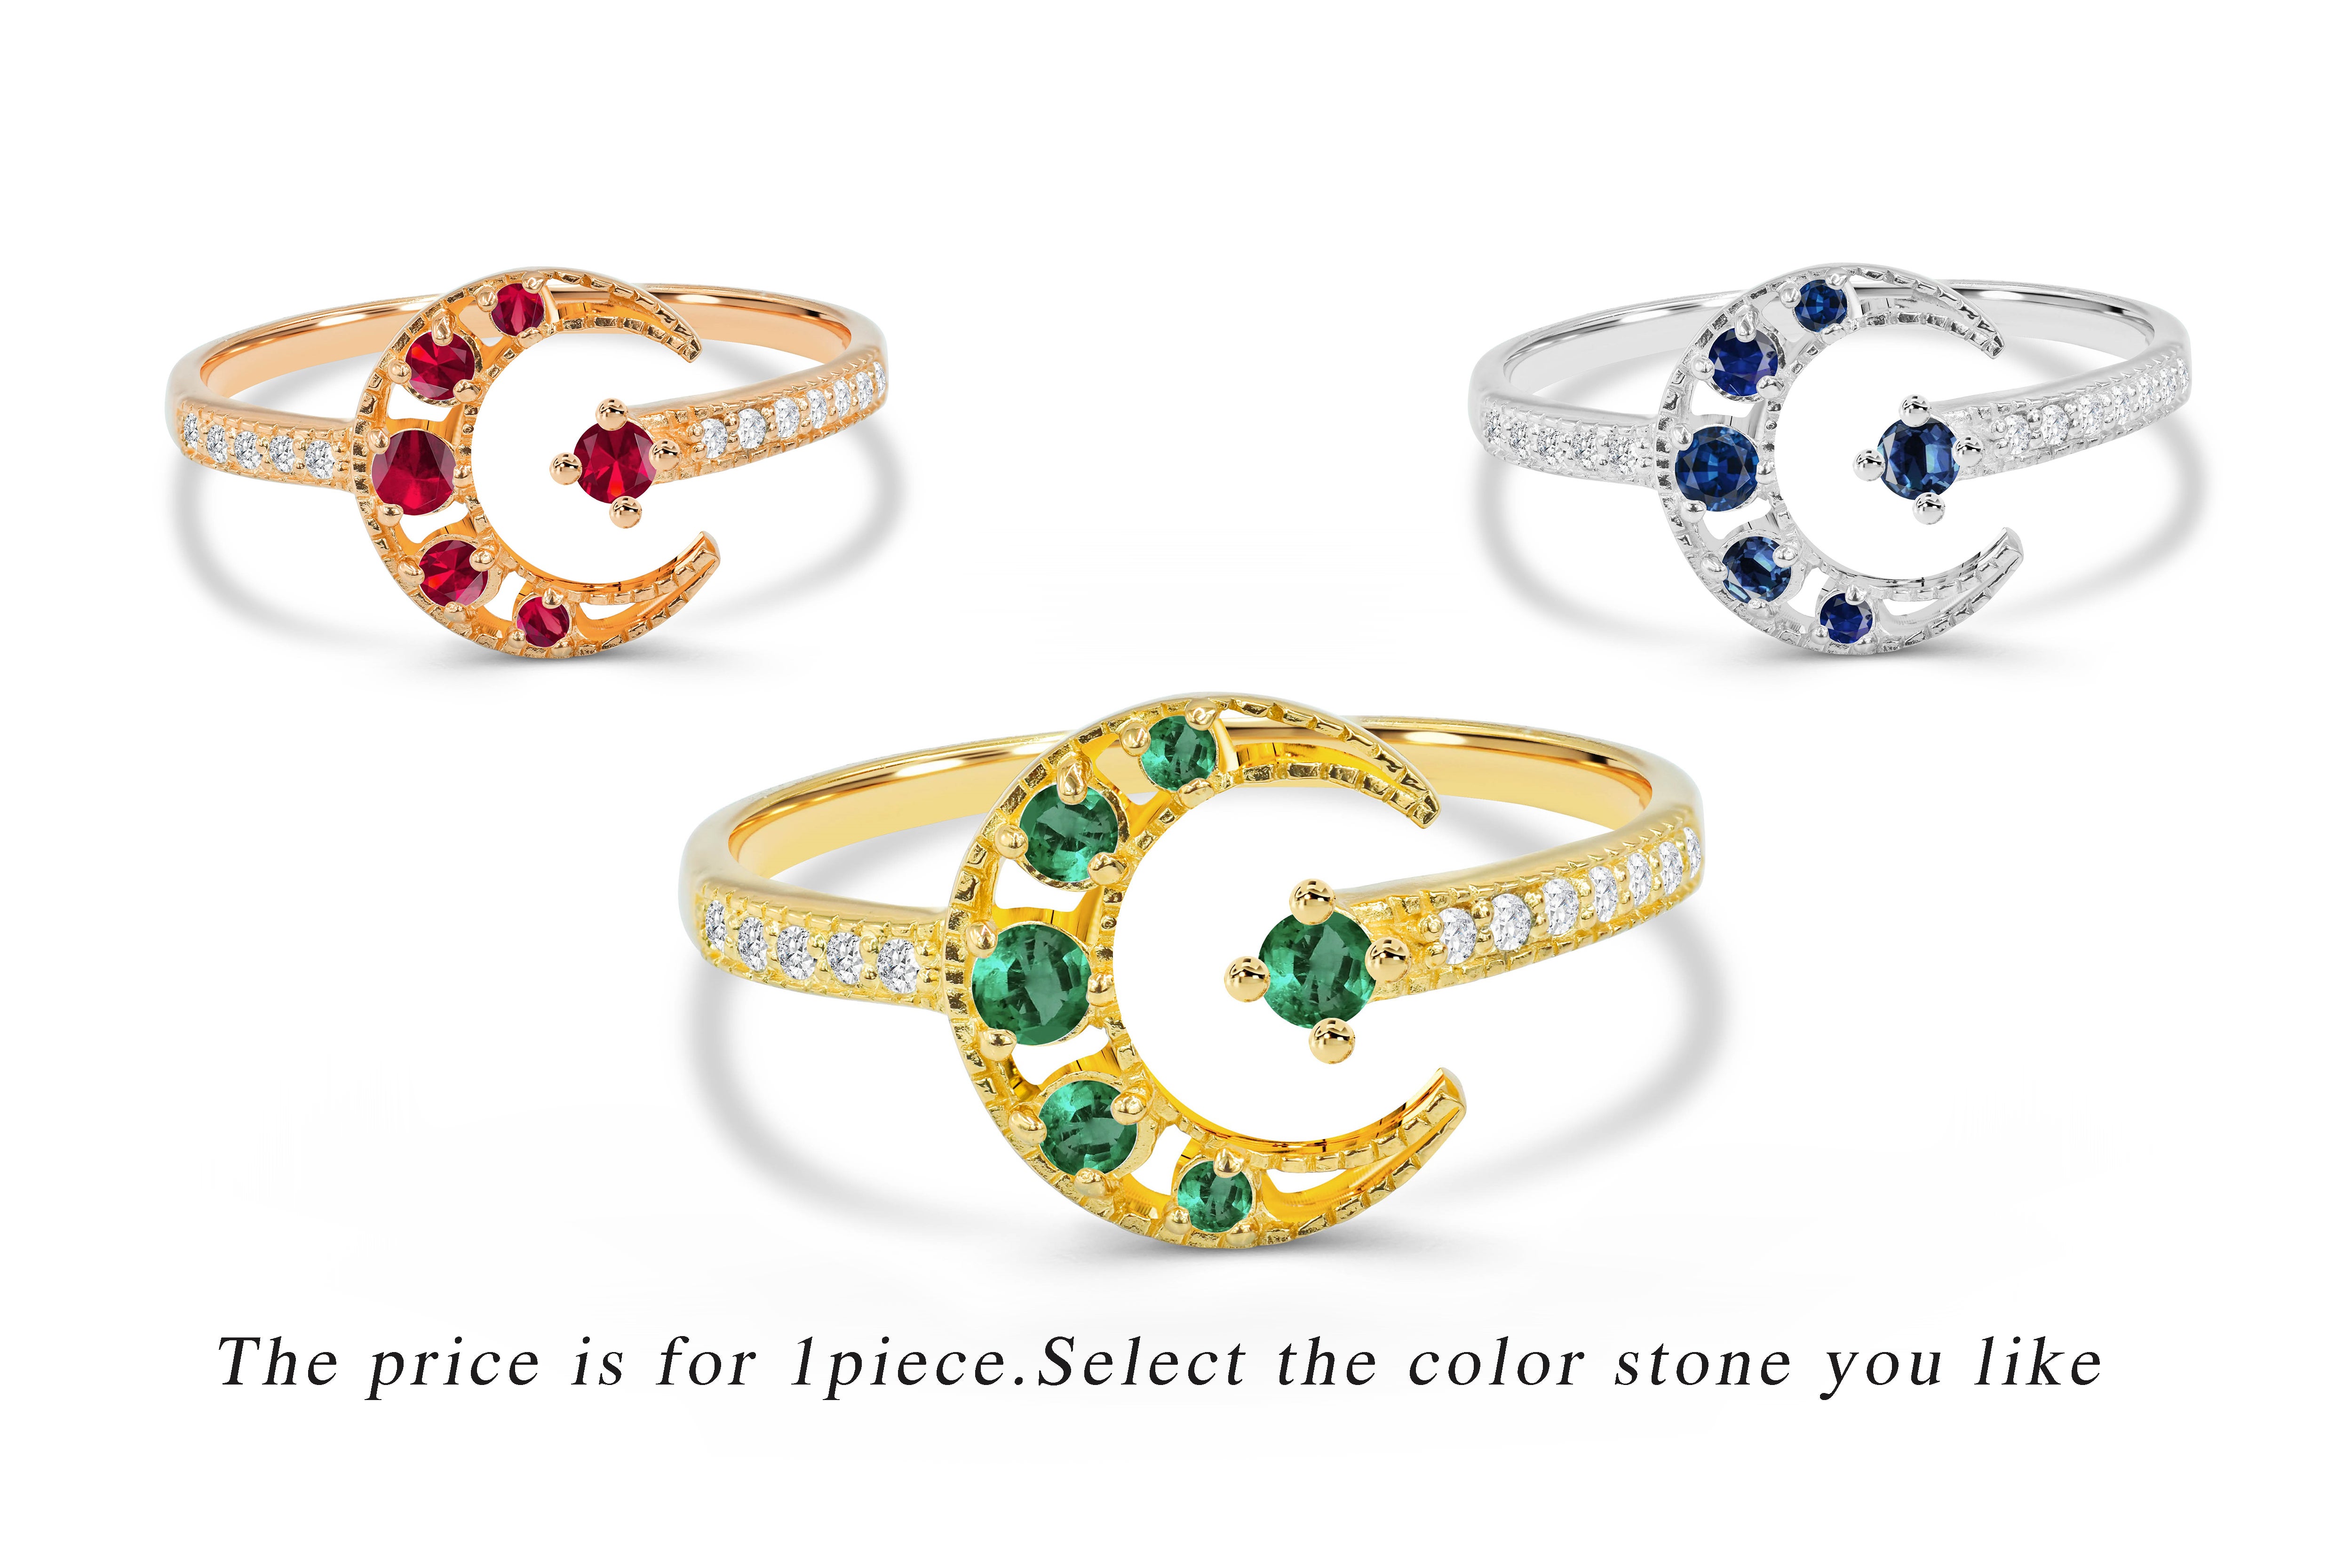 0.31 Ct Emerald, Ruby and Sapphire Crescent Moon Diamond Ring in 18K Gold